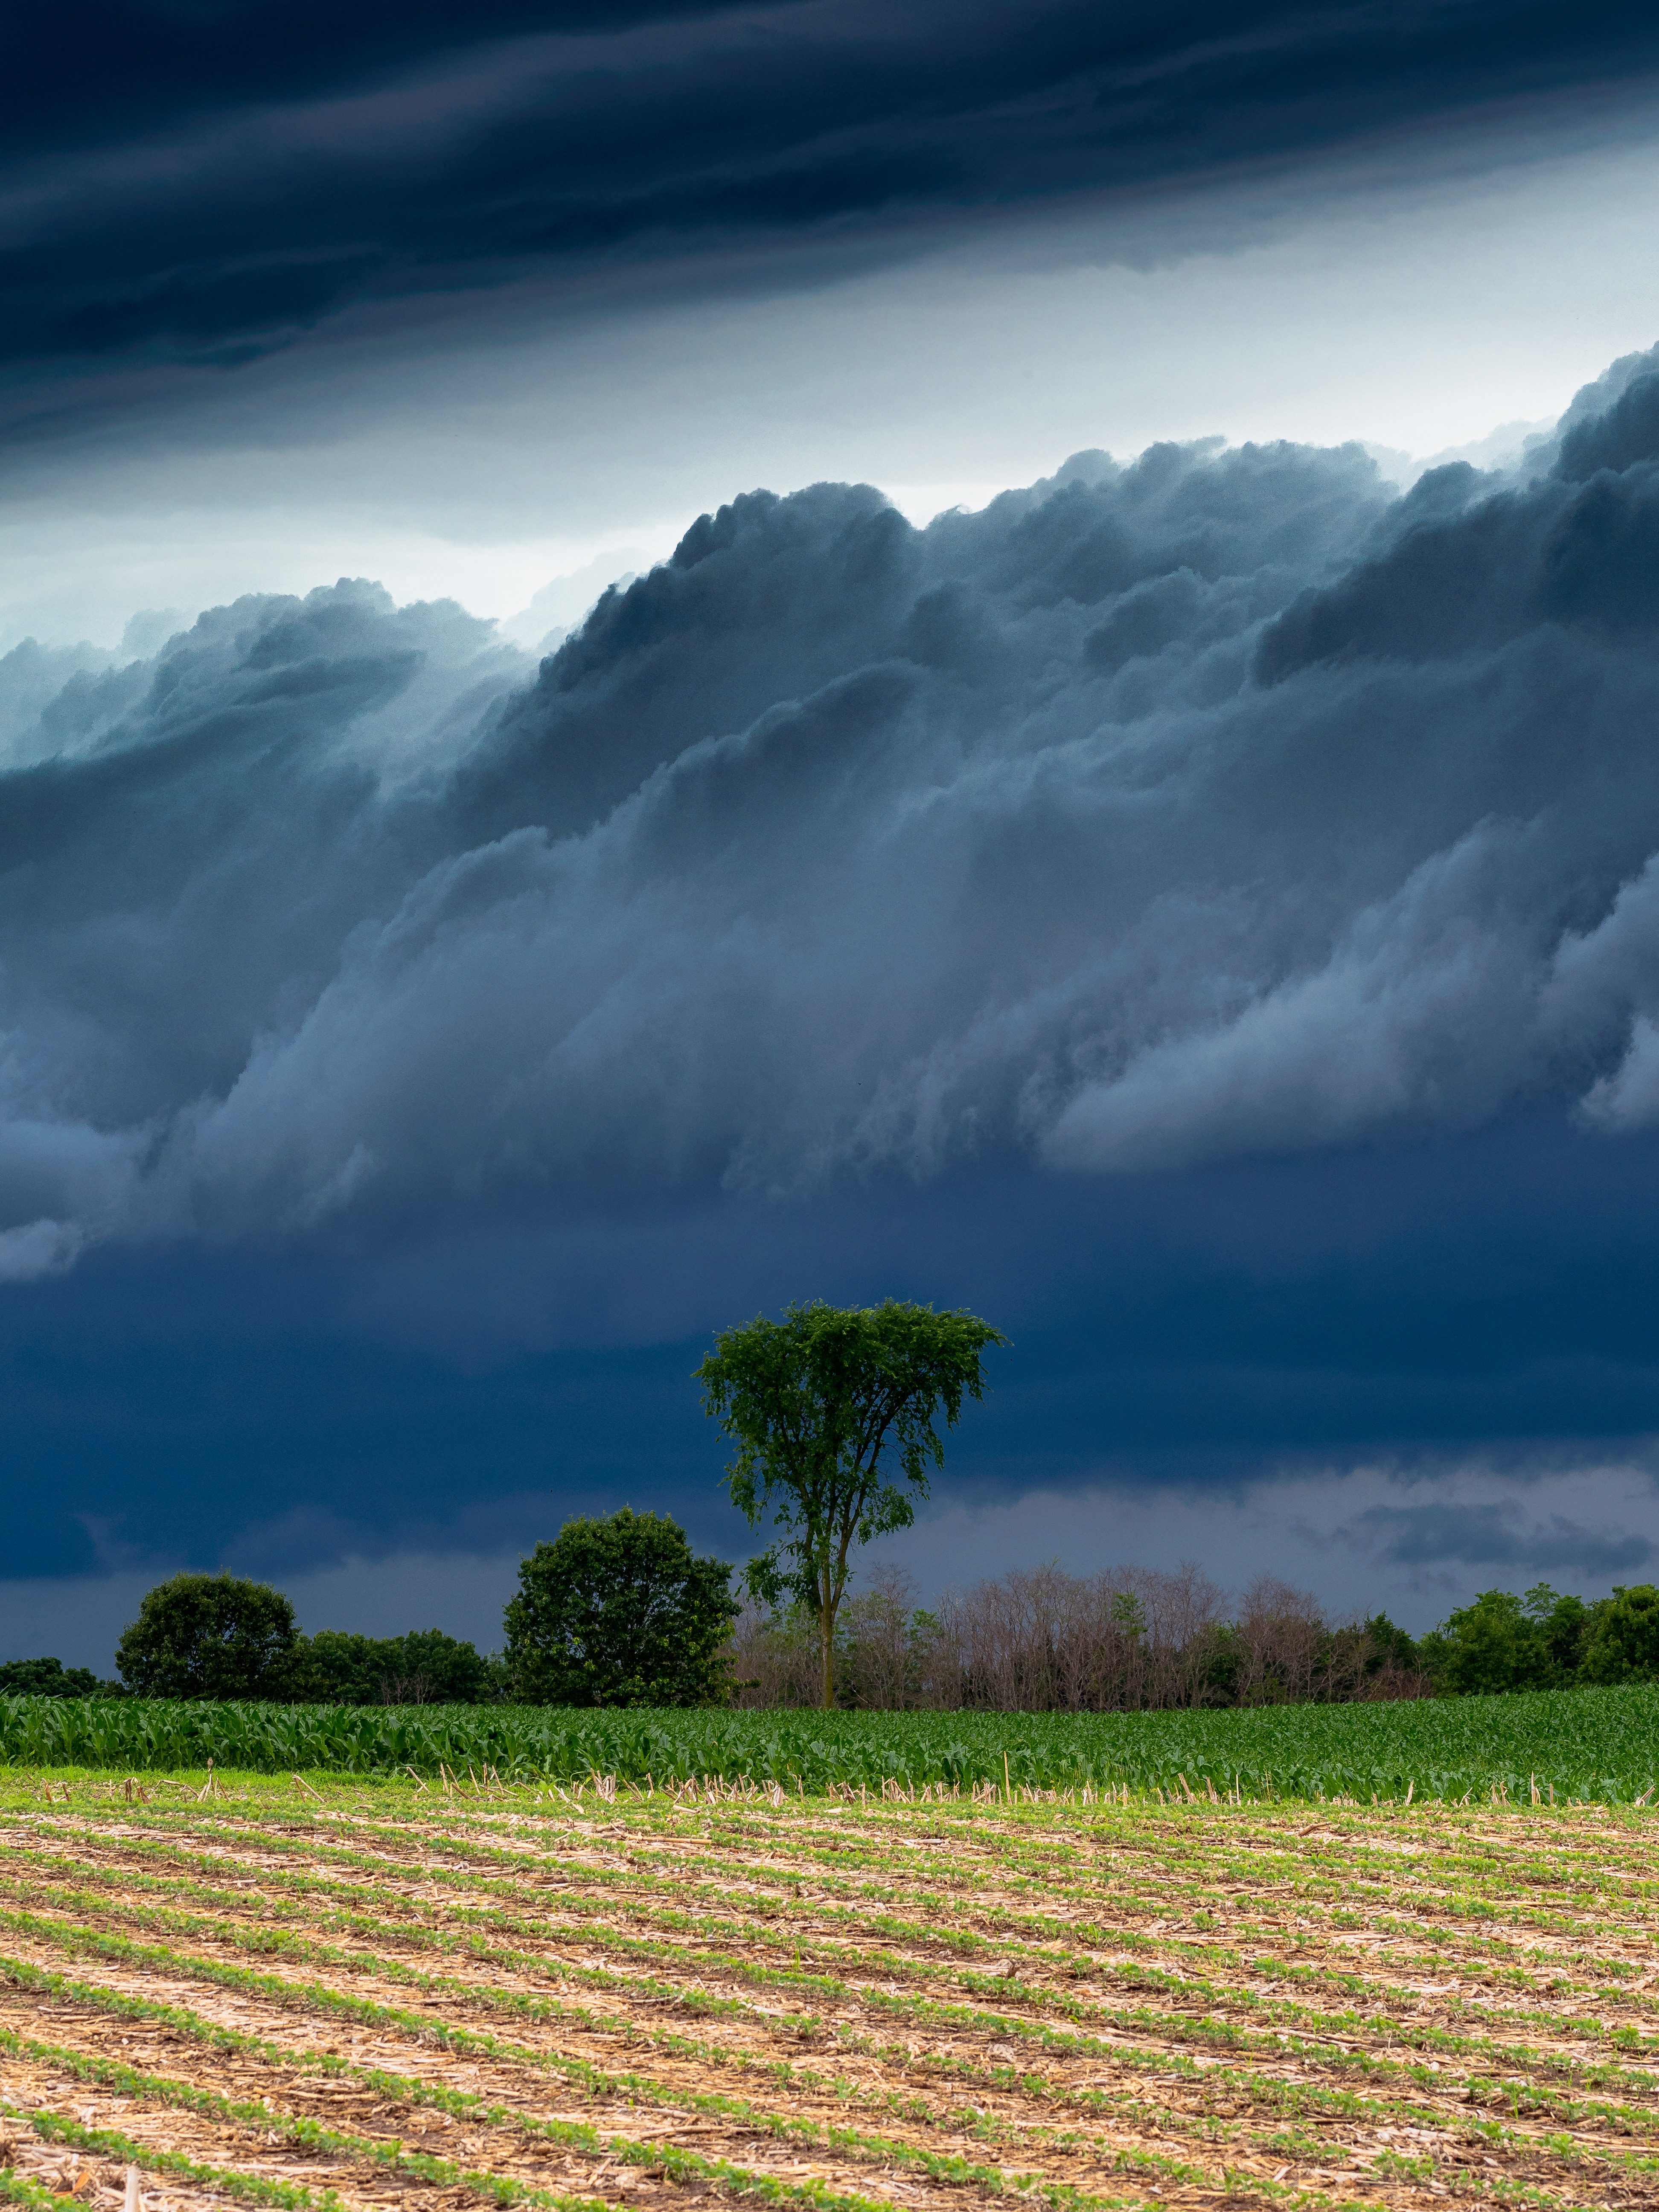 thunderstorm, landscape, nature, trees, clouds, field, storm